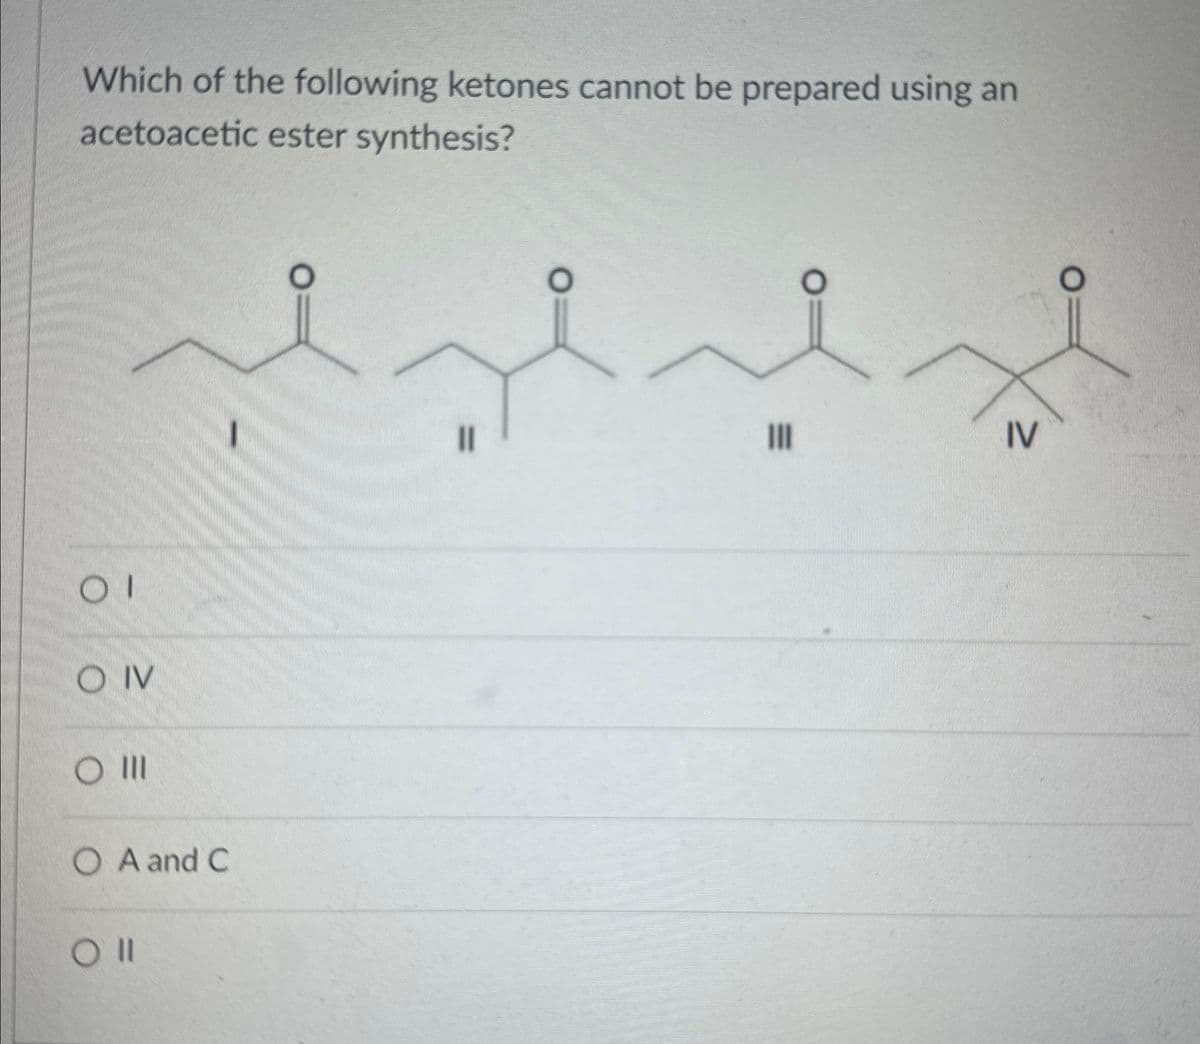 Which of the following ketones cannot be prepared using an
acetoacetic ester synthesis?
01
OIV
O III
OA and C
Oll
။
IV